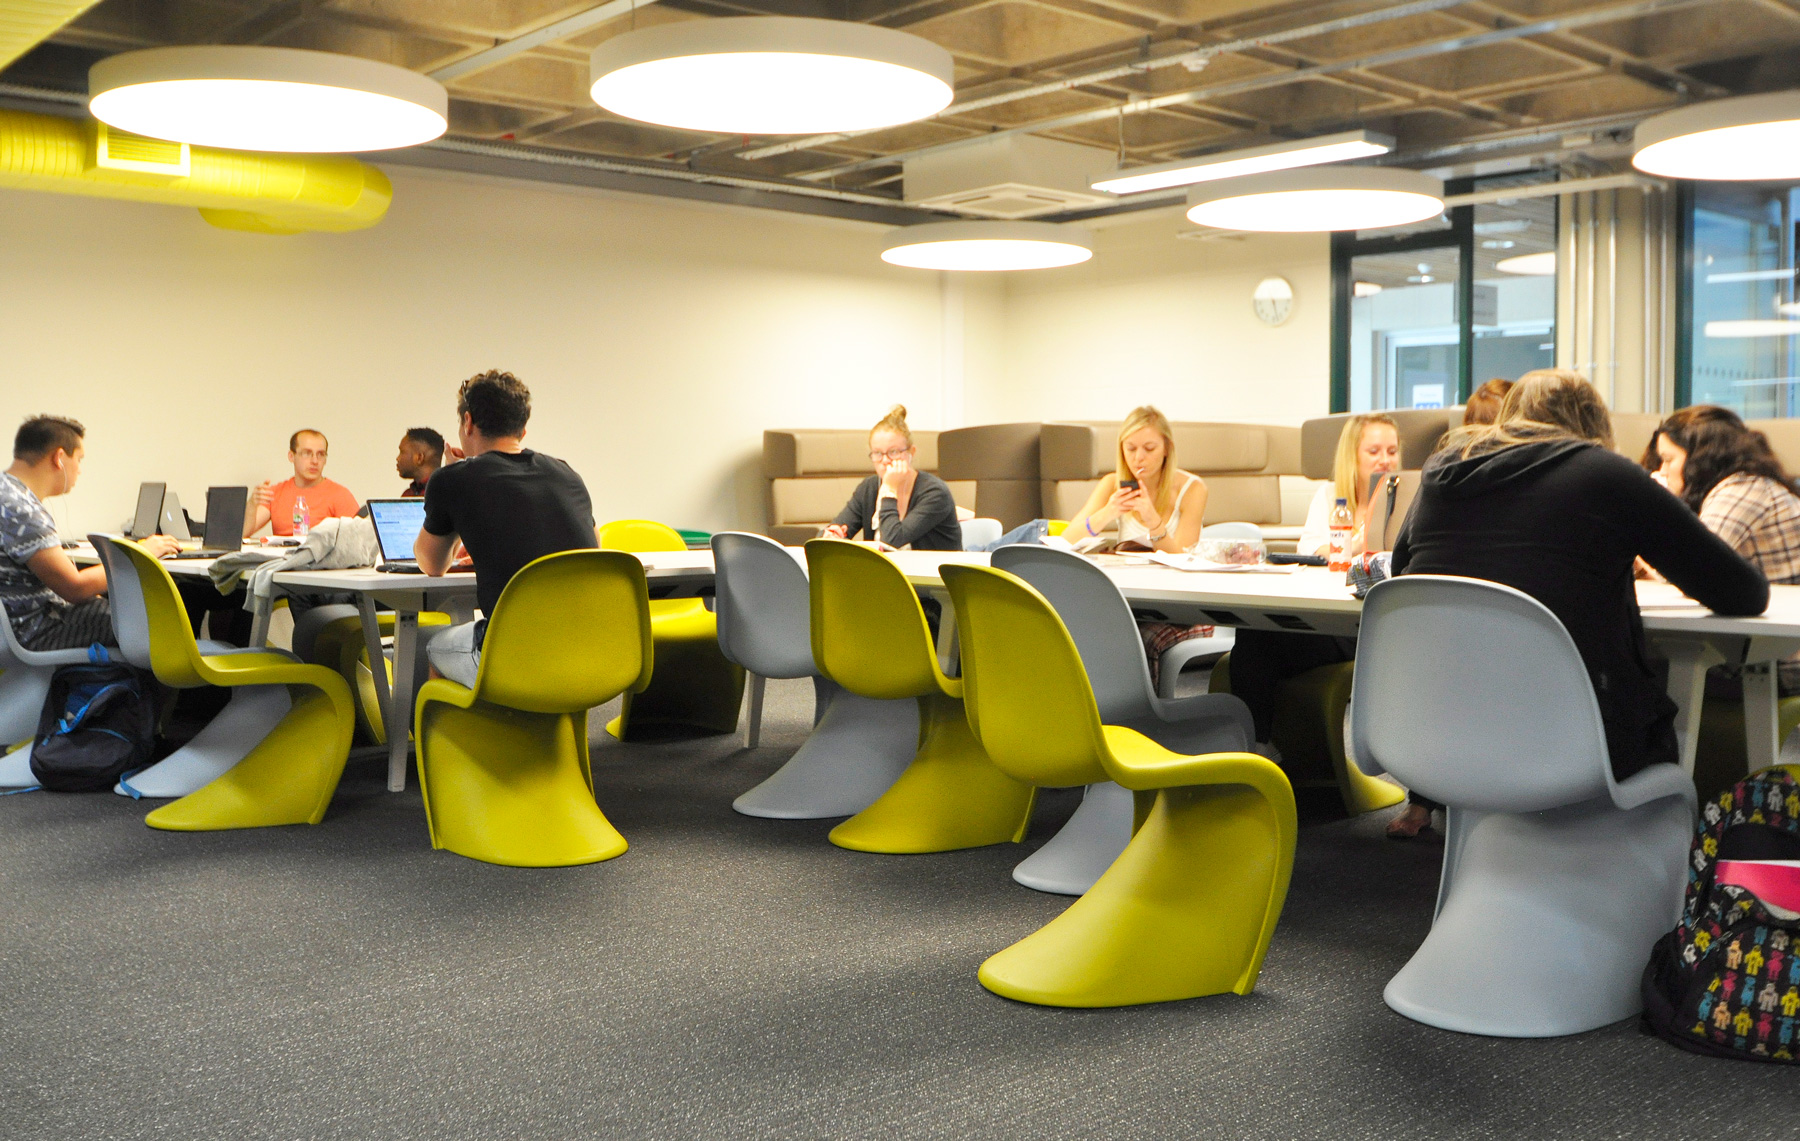 University-of-Portsmouth---Library---Panton-Chair-group-Yellow-and-Grey---People-Studying